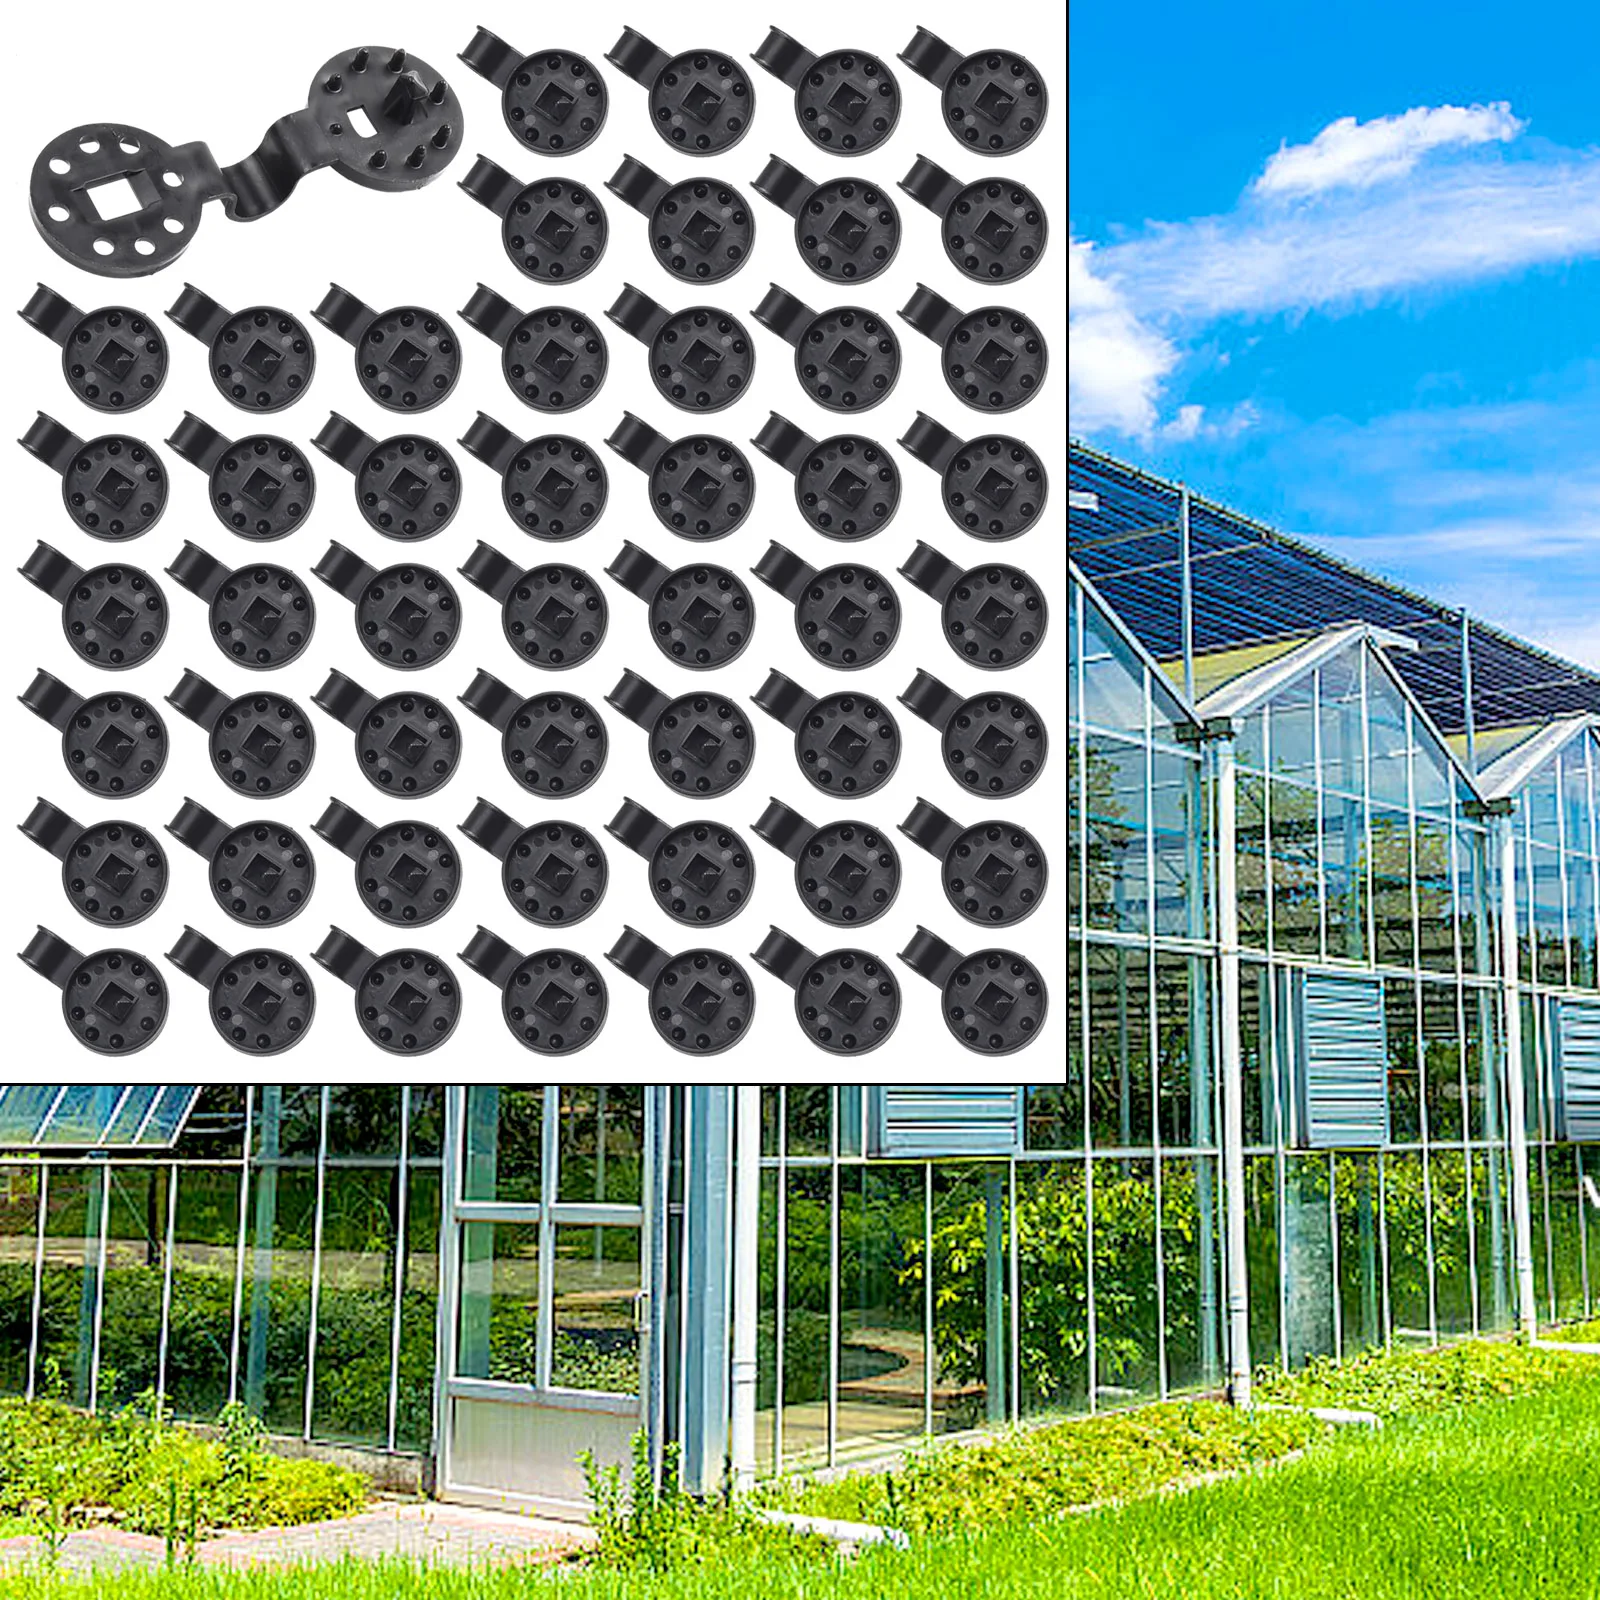 Quantity Heavy Duty Garden Netting Fitment Netting Number Of Pieces Sufficient Quantity For Any Shade Cloth With Mesh